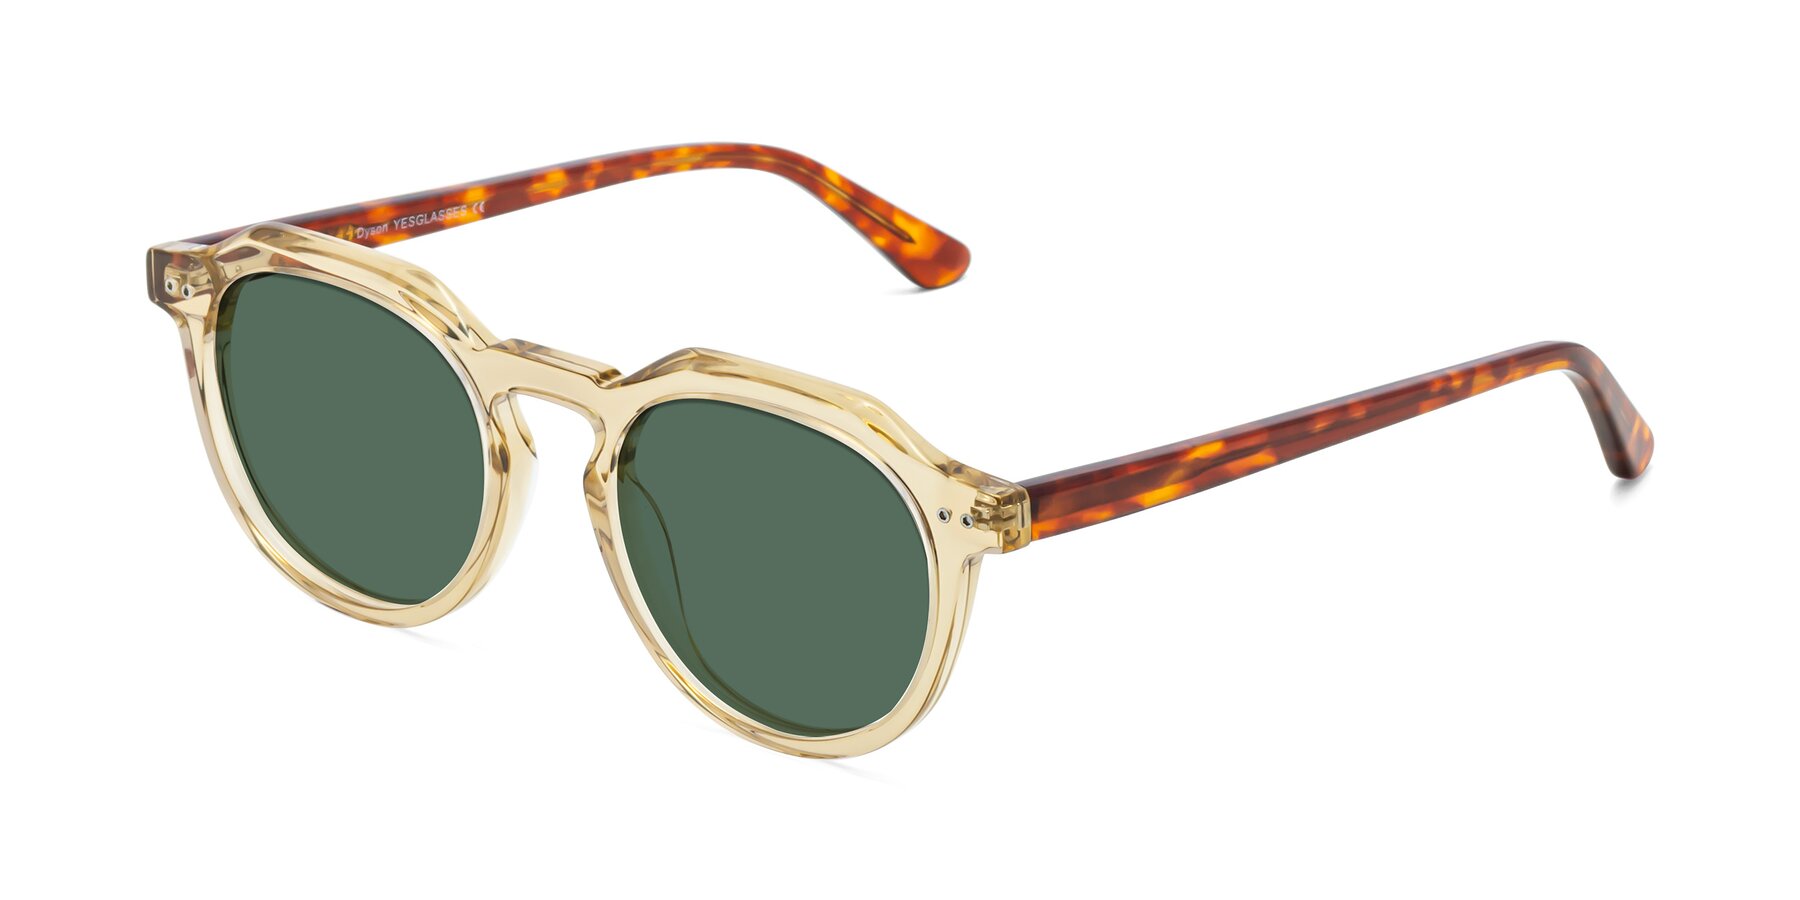 Angle of Dyson in Amber-Tortoise with Green Polarized Lenses